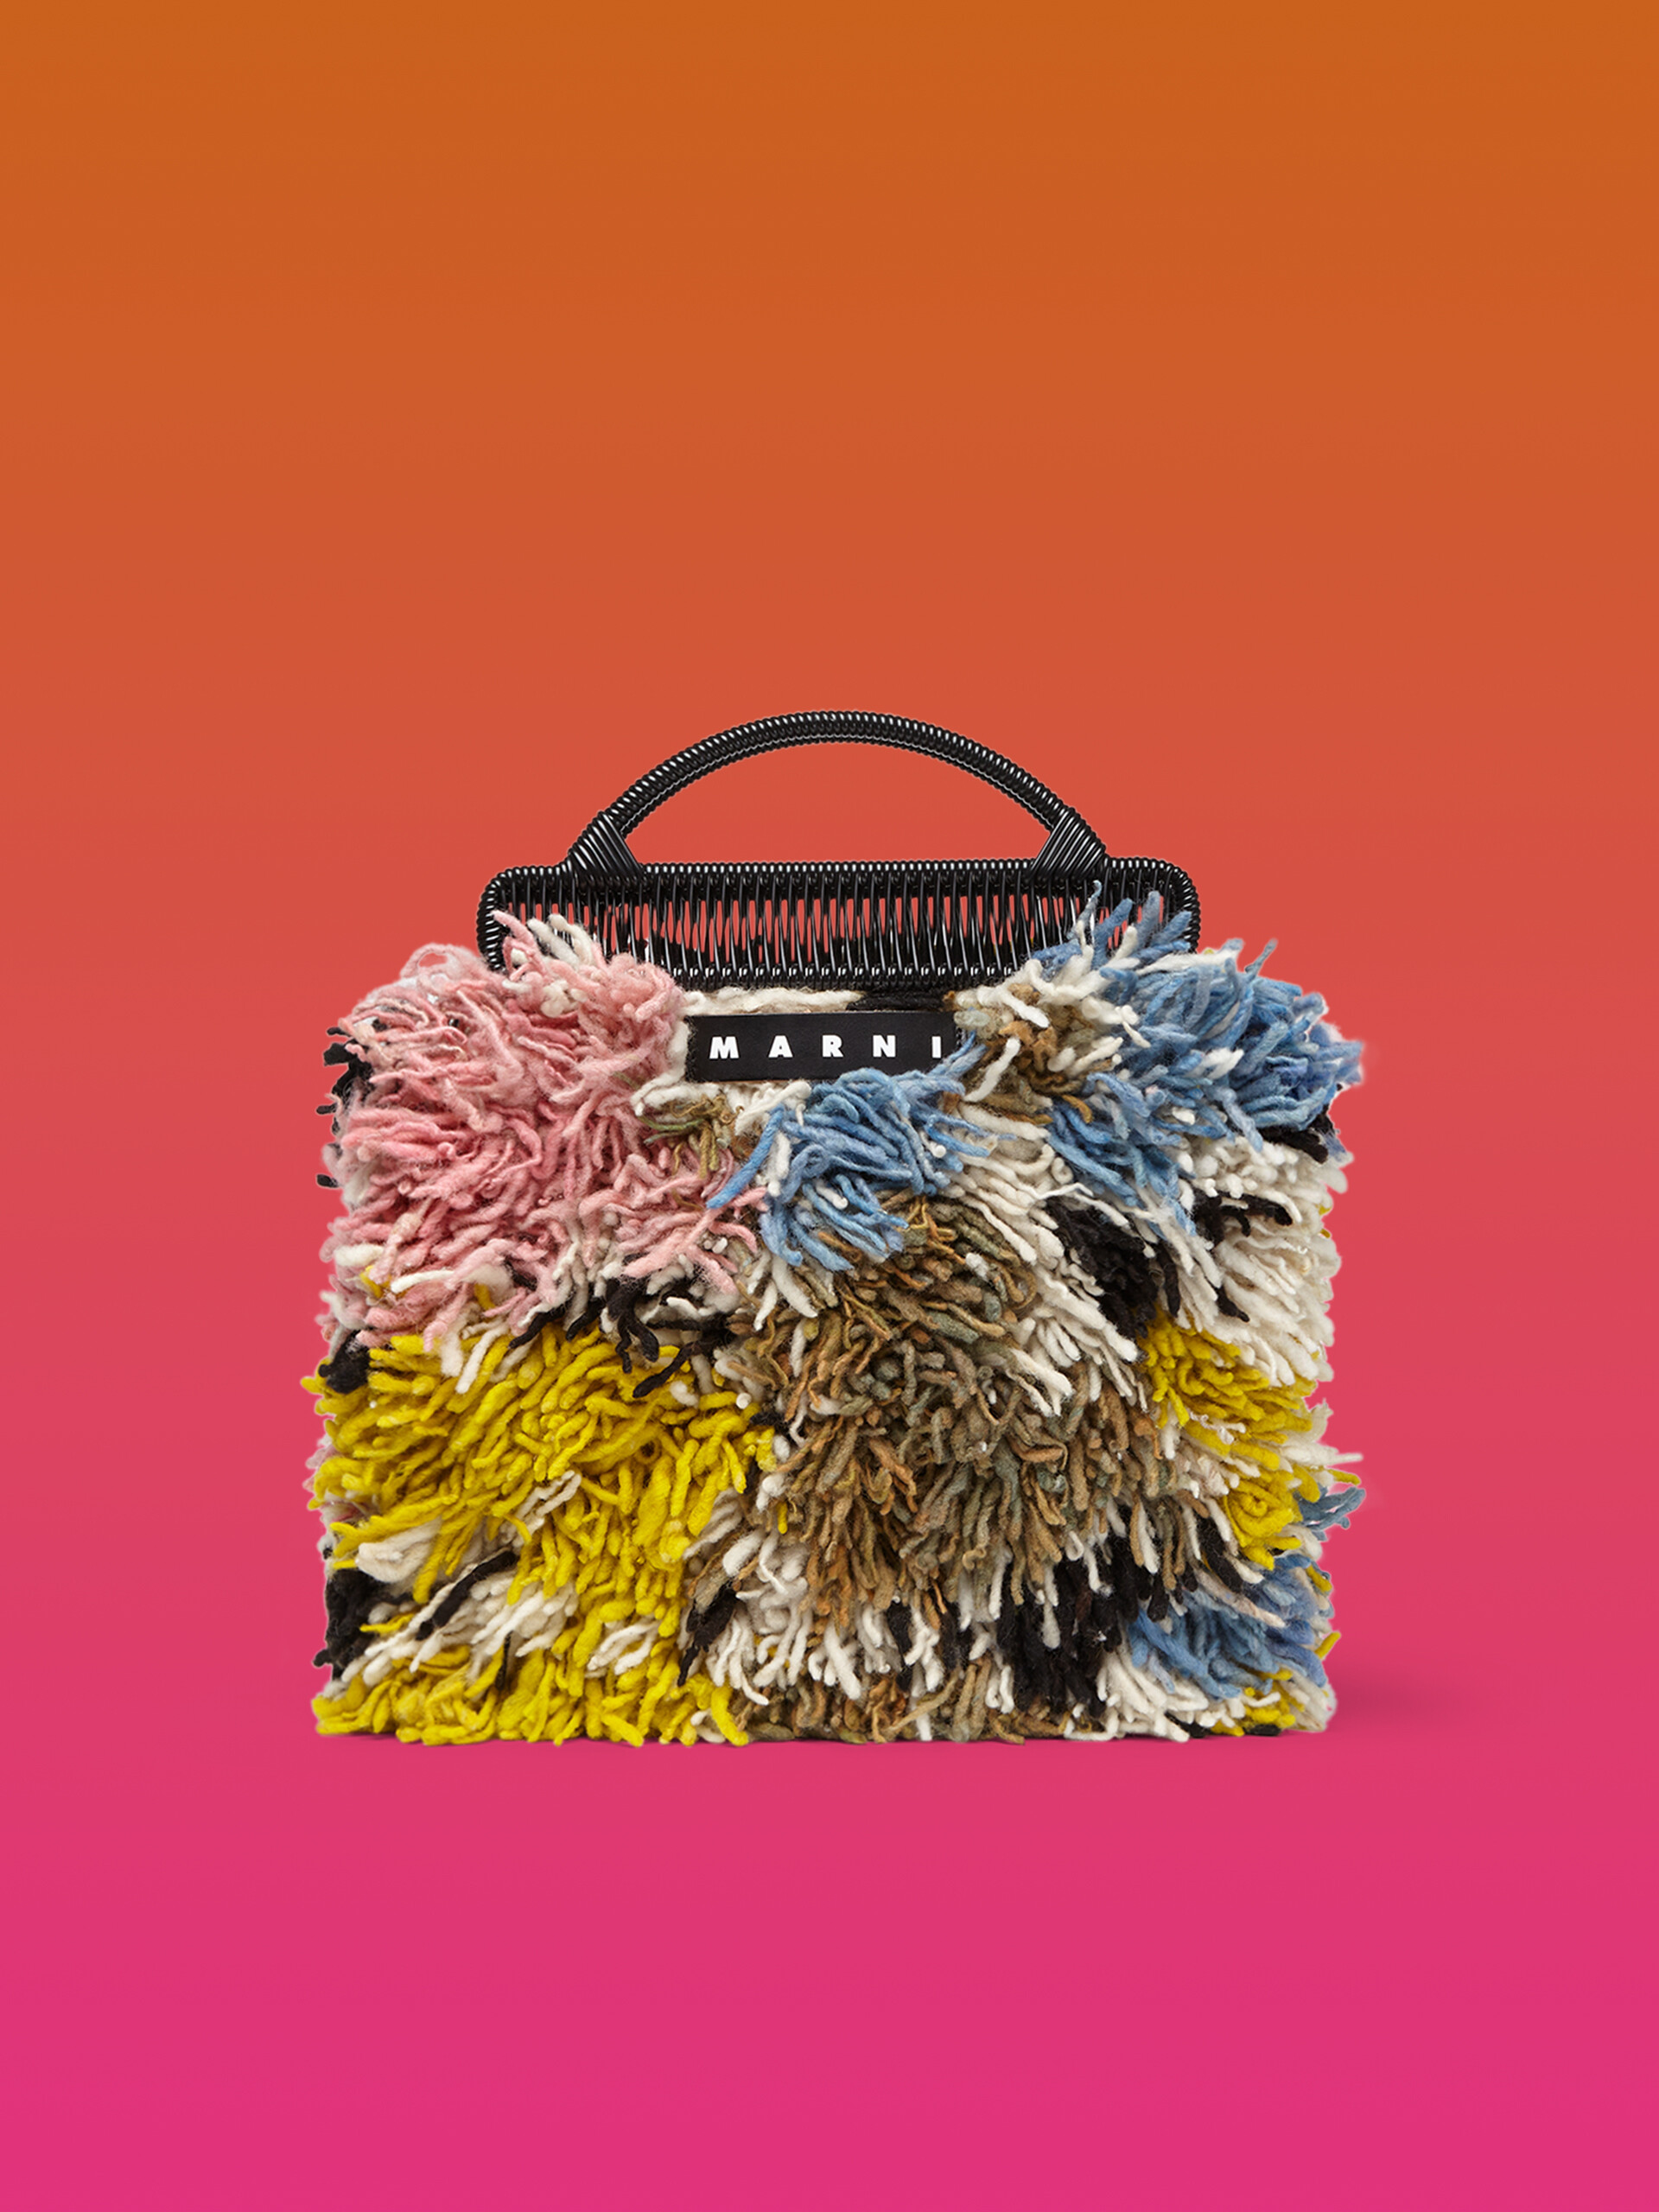 MARNI MARKET multicoloured frame bag in yellow pink and pale blue long wool - Furniture - Image 1